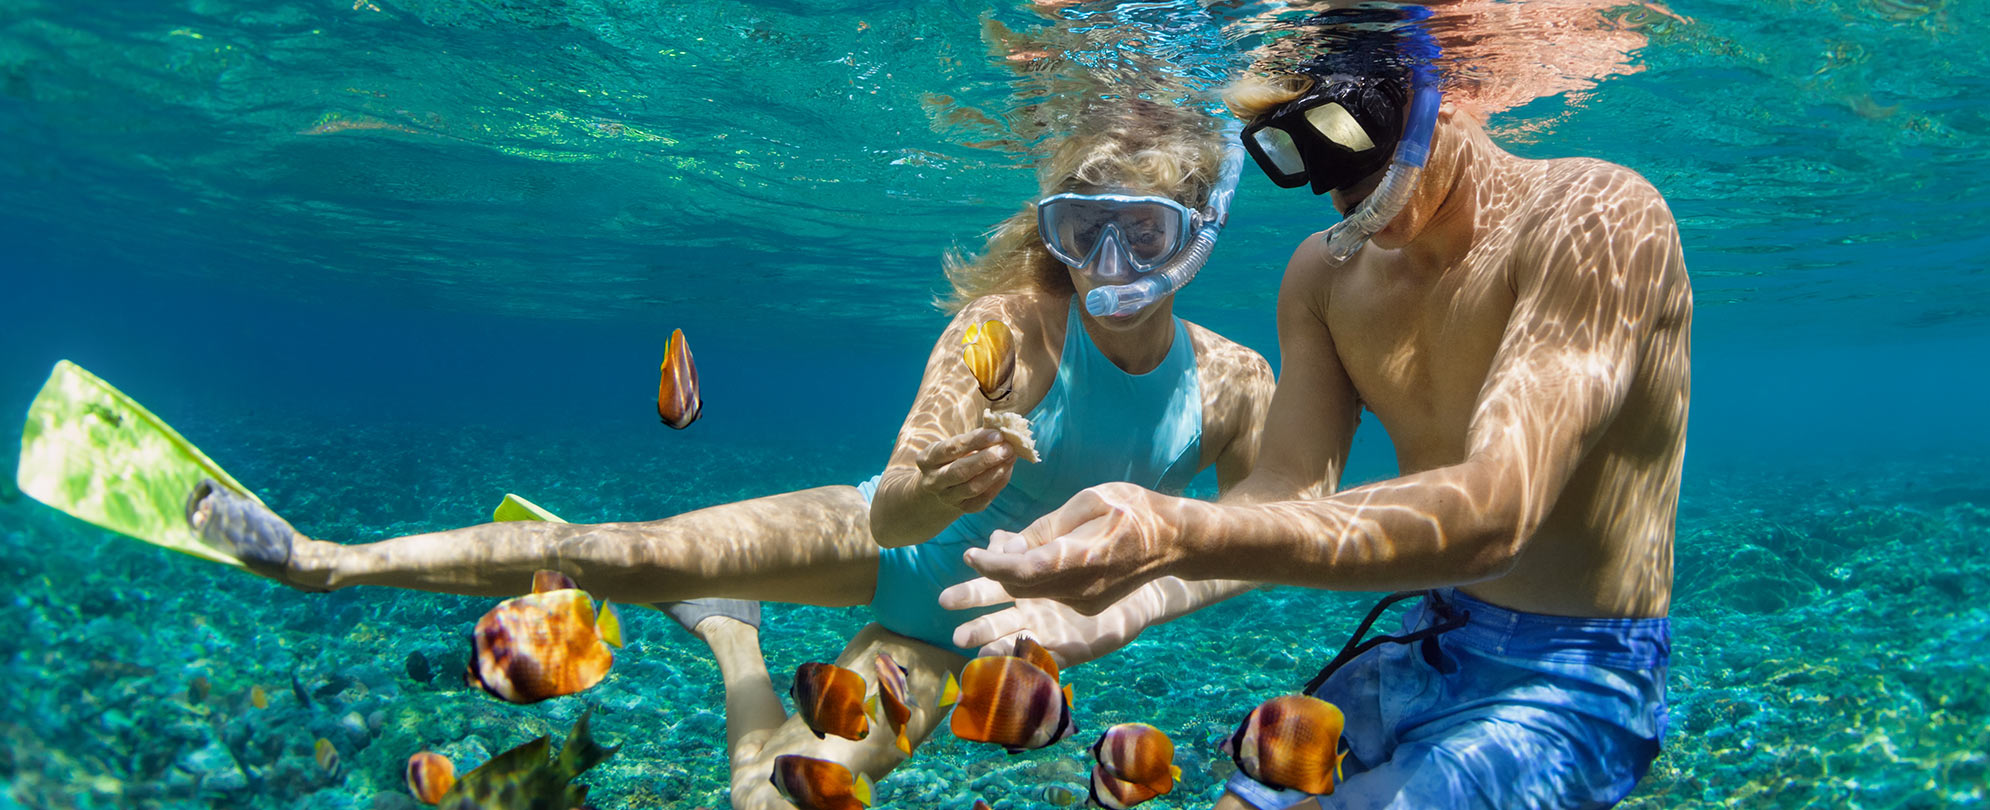 A man and a woman snorkeling underwater surrounded by tropical fish during their Caribbean cruise.